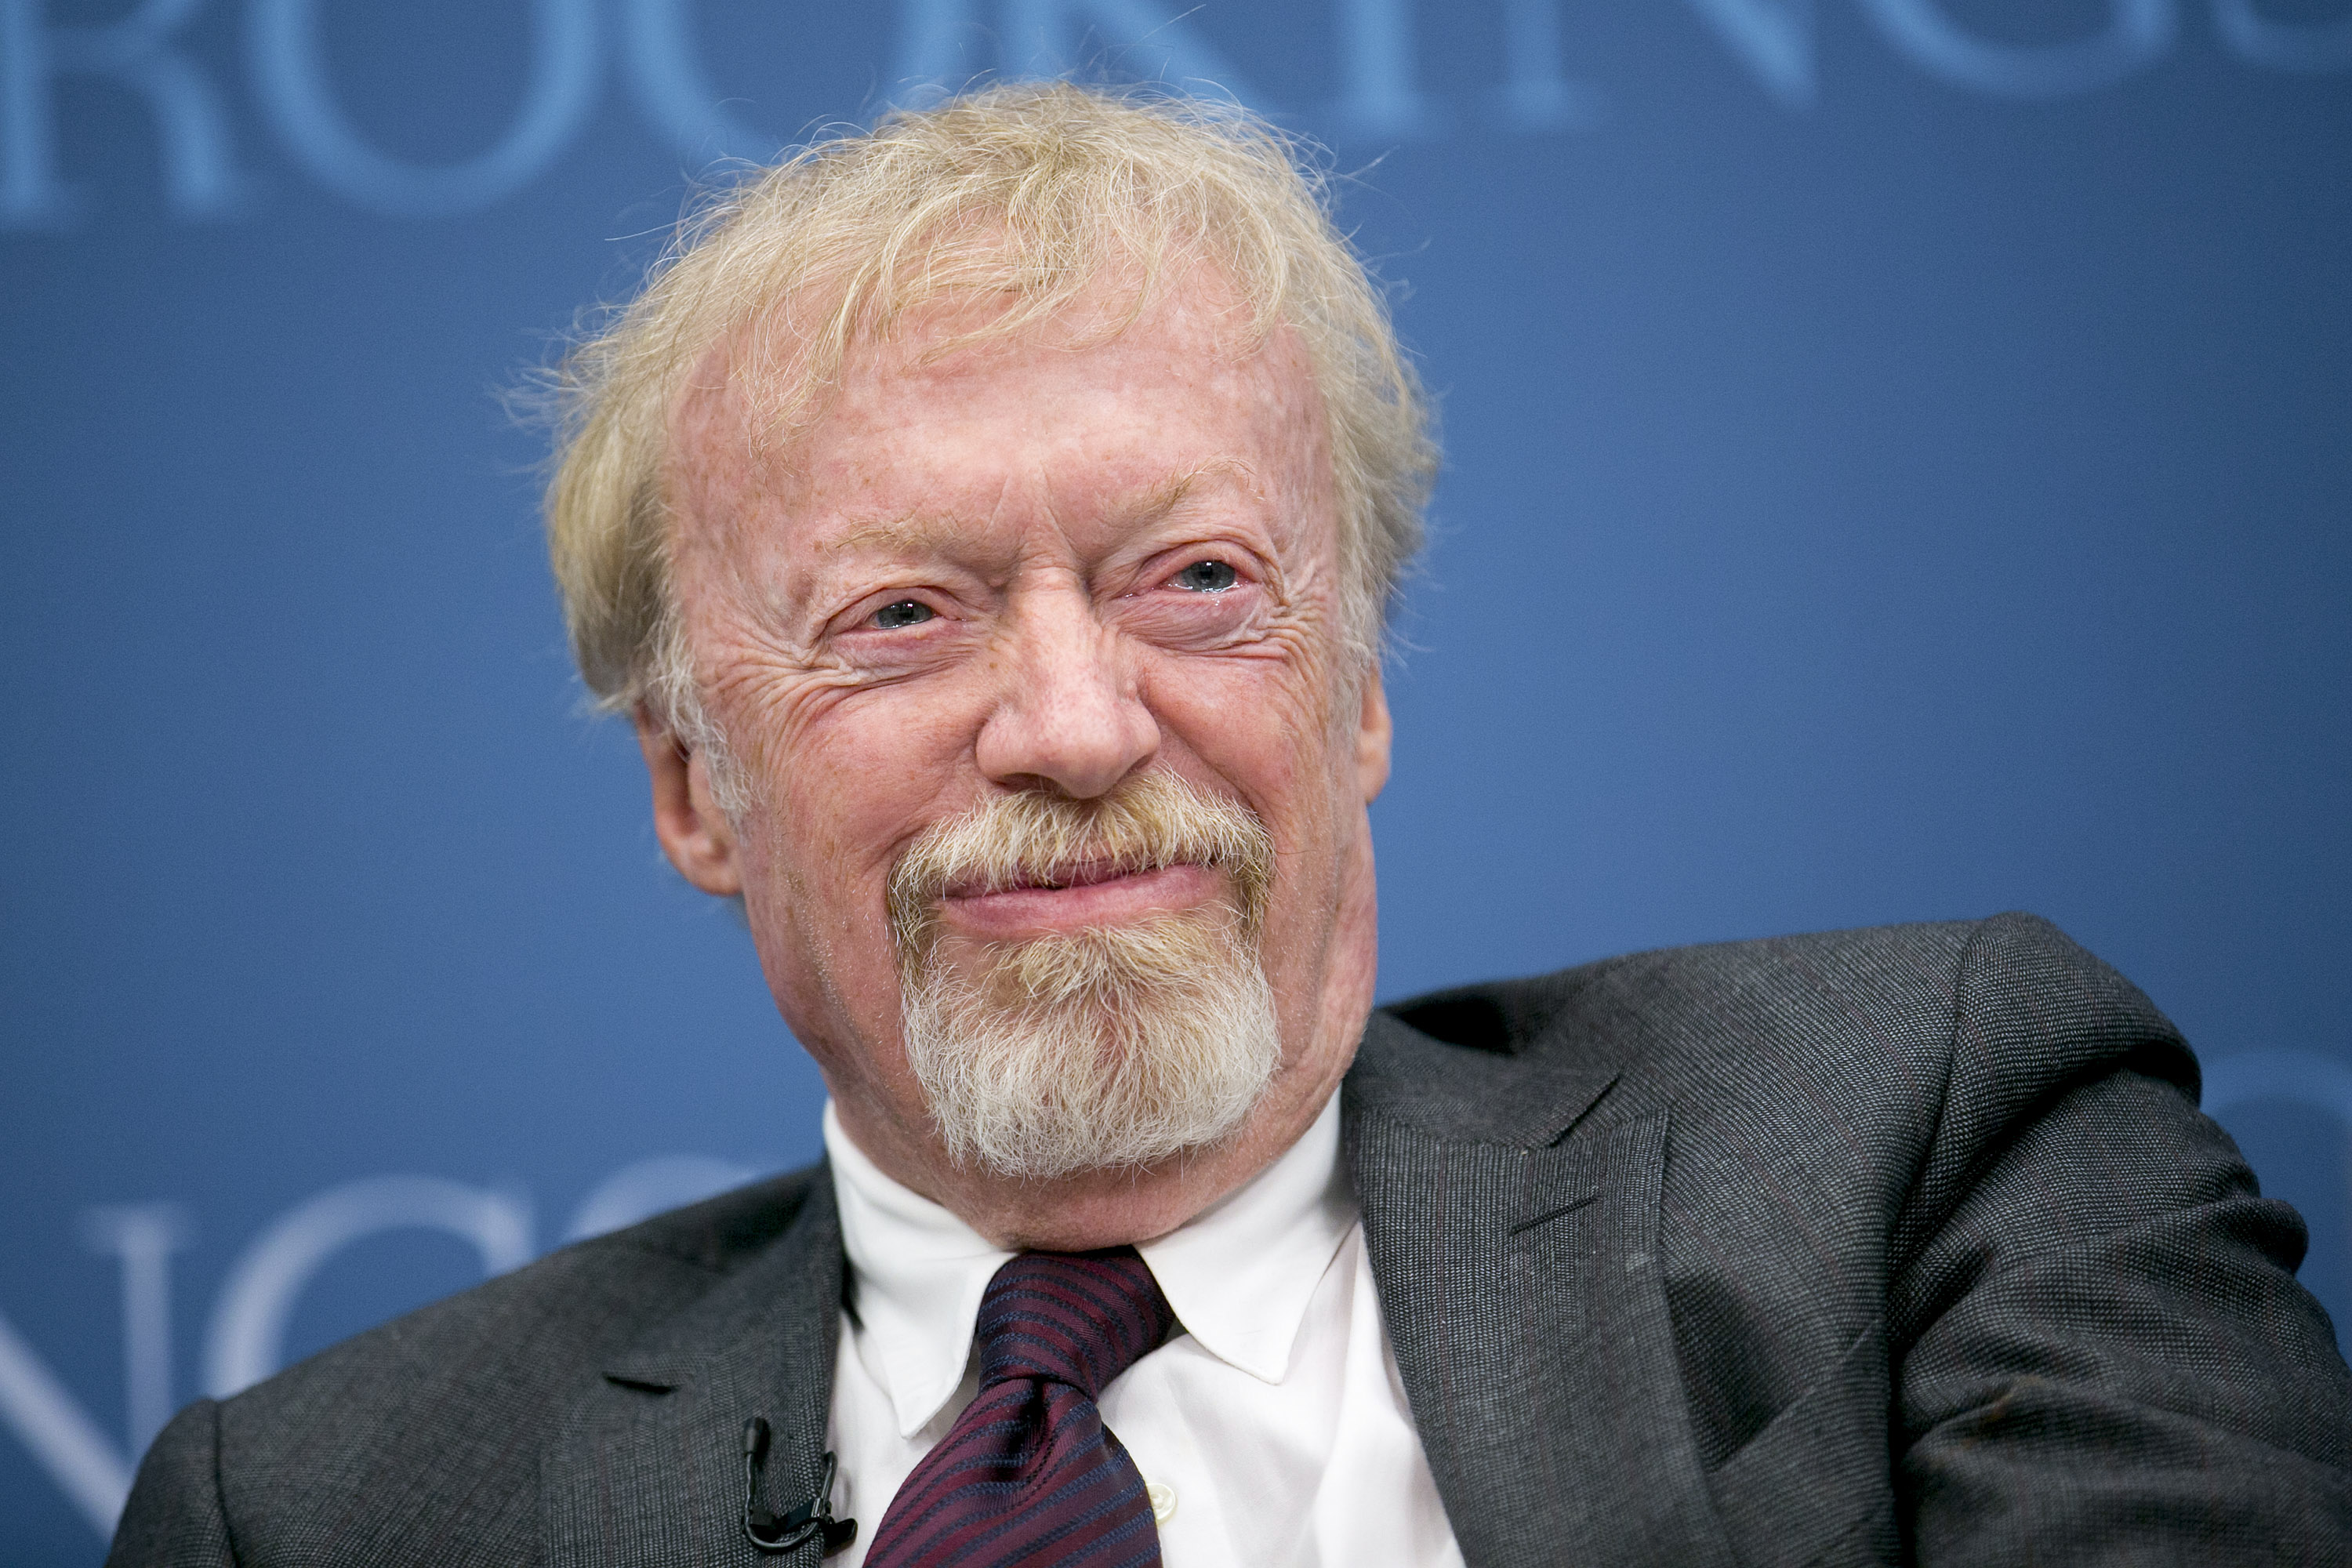 Phil Knight attends a panel discussion at the Brookings Institution in Washington, D.C., on Jan. 15, 2013. (Bloomberg via Getty Images)